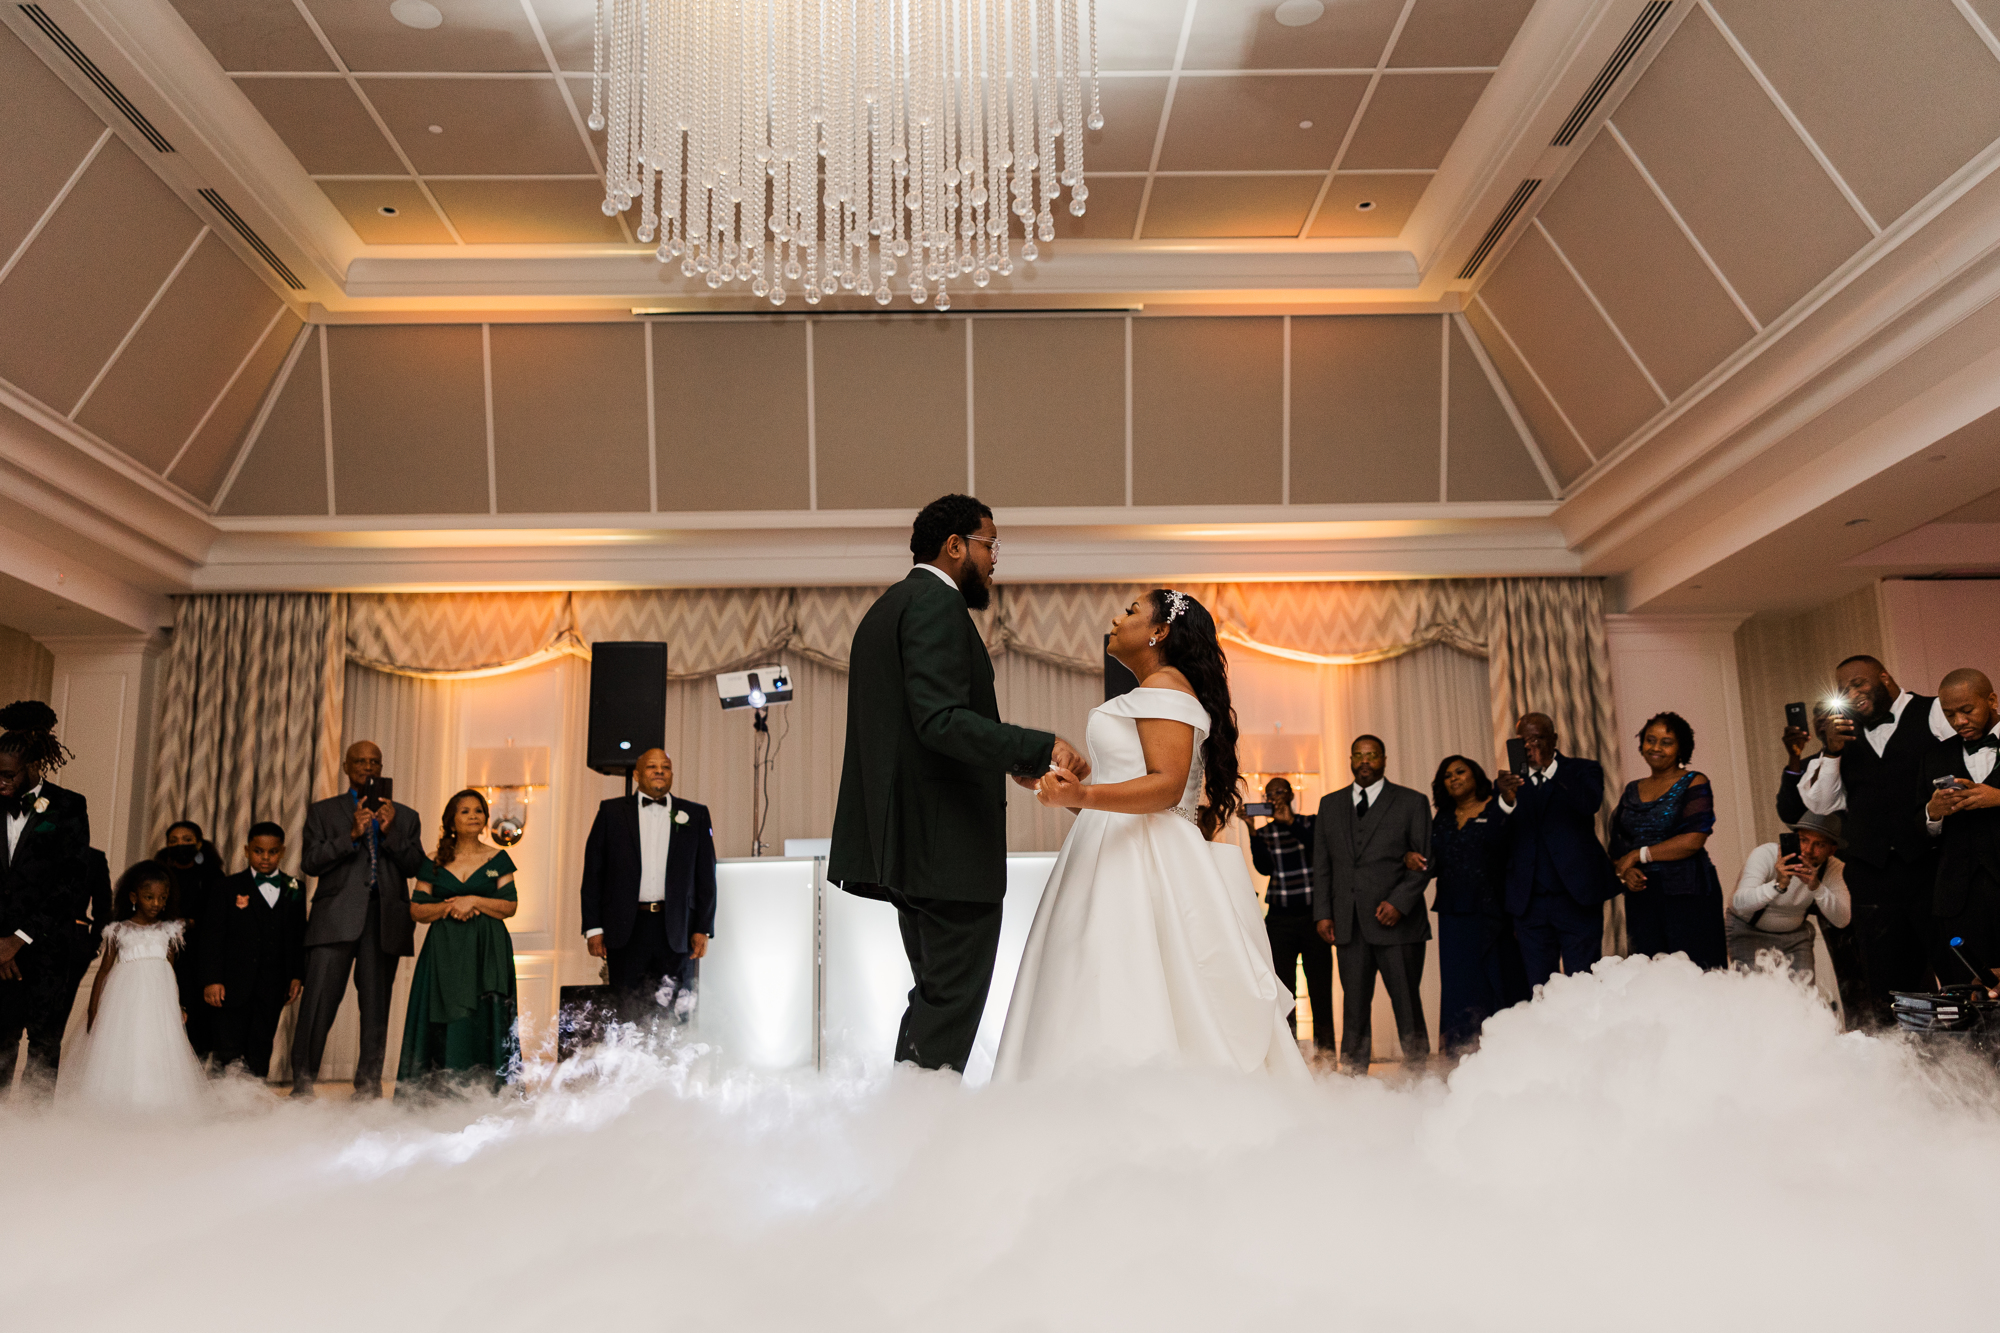 Original New Jersey Wedding Photos at Edgewood Country Club in Fall